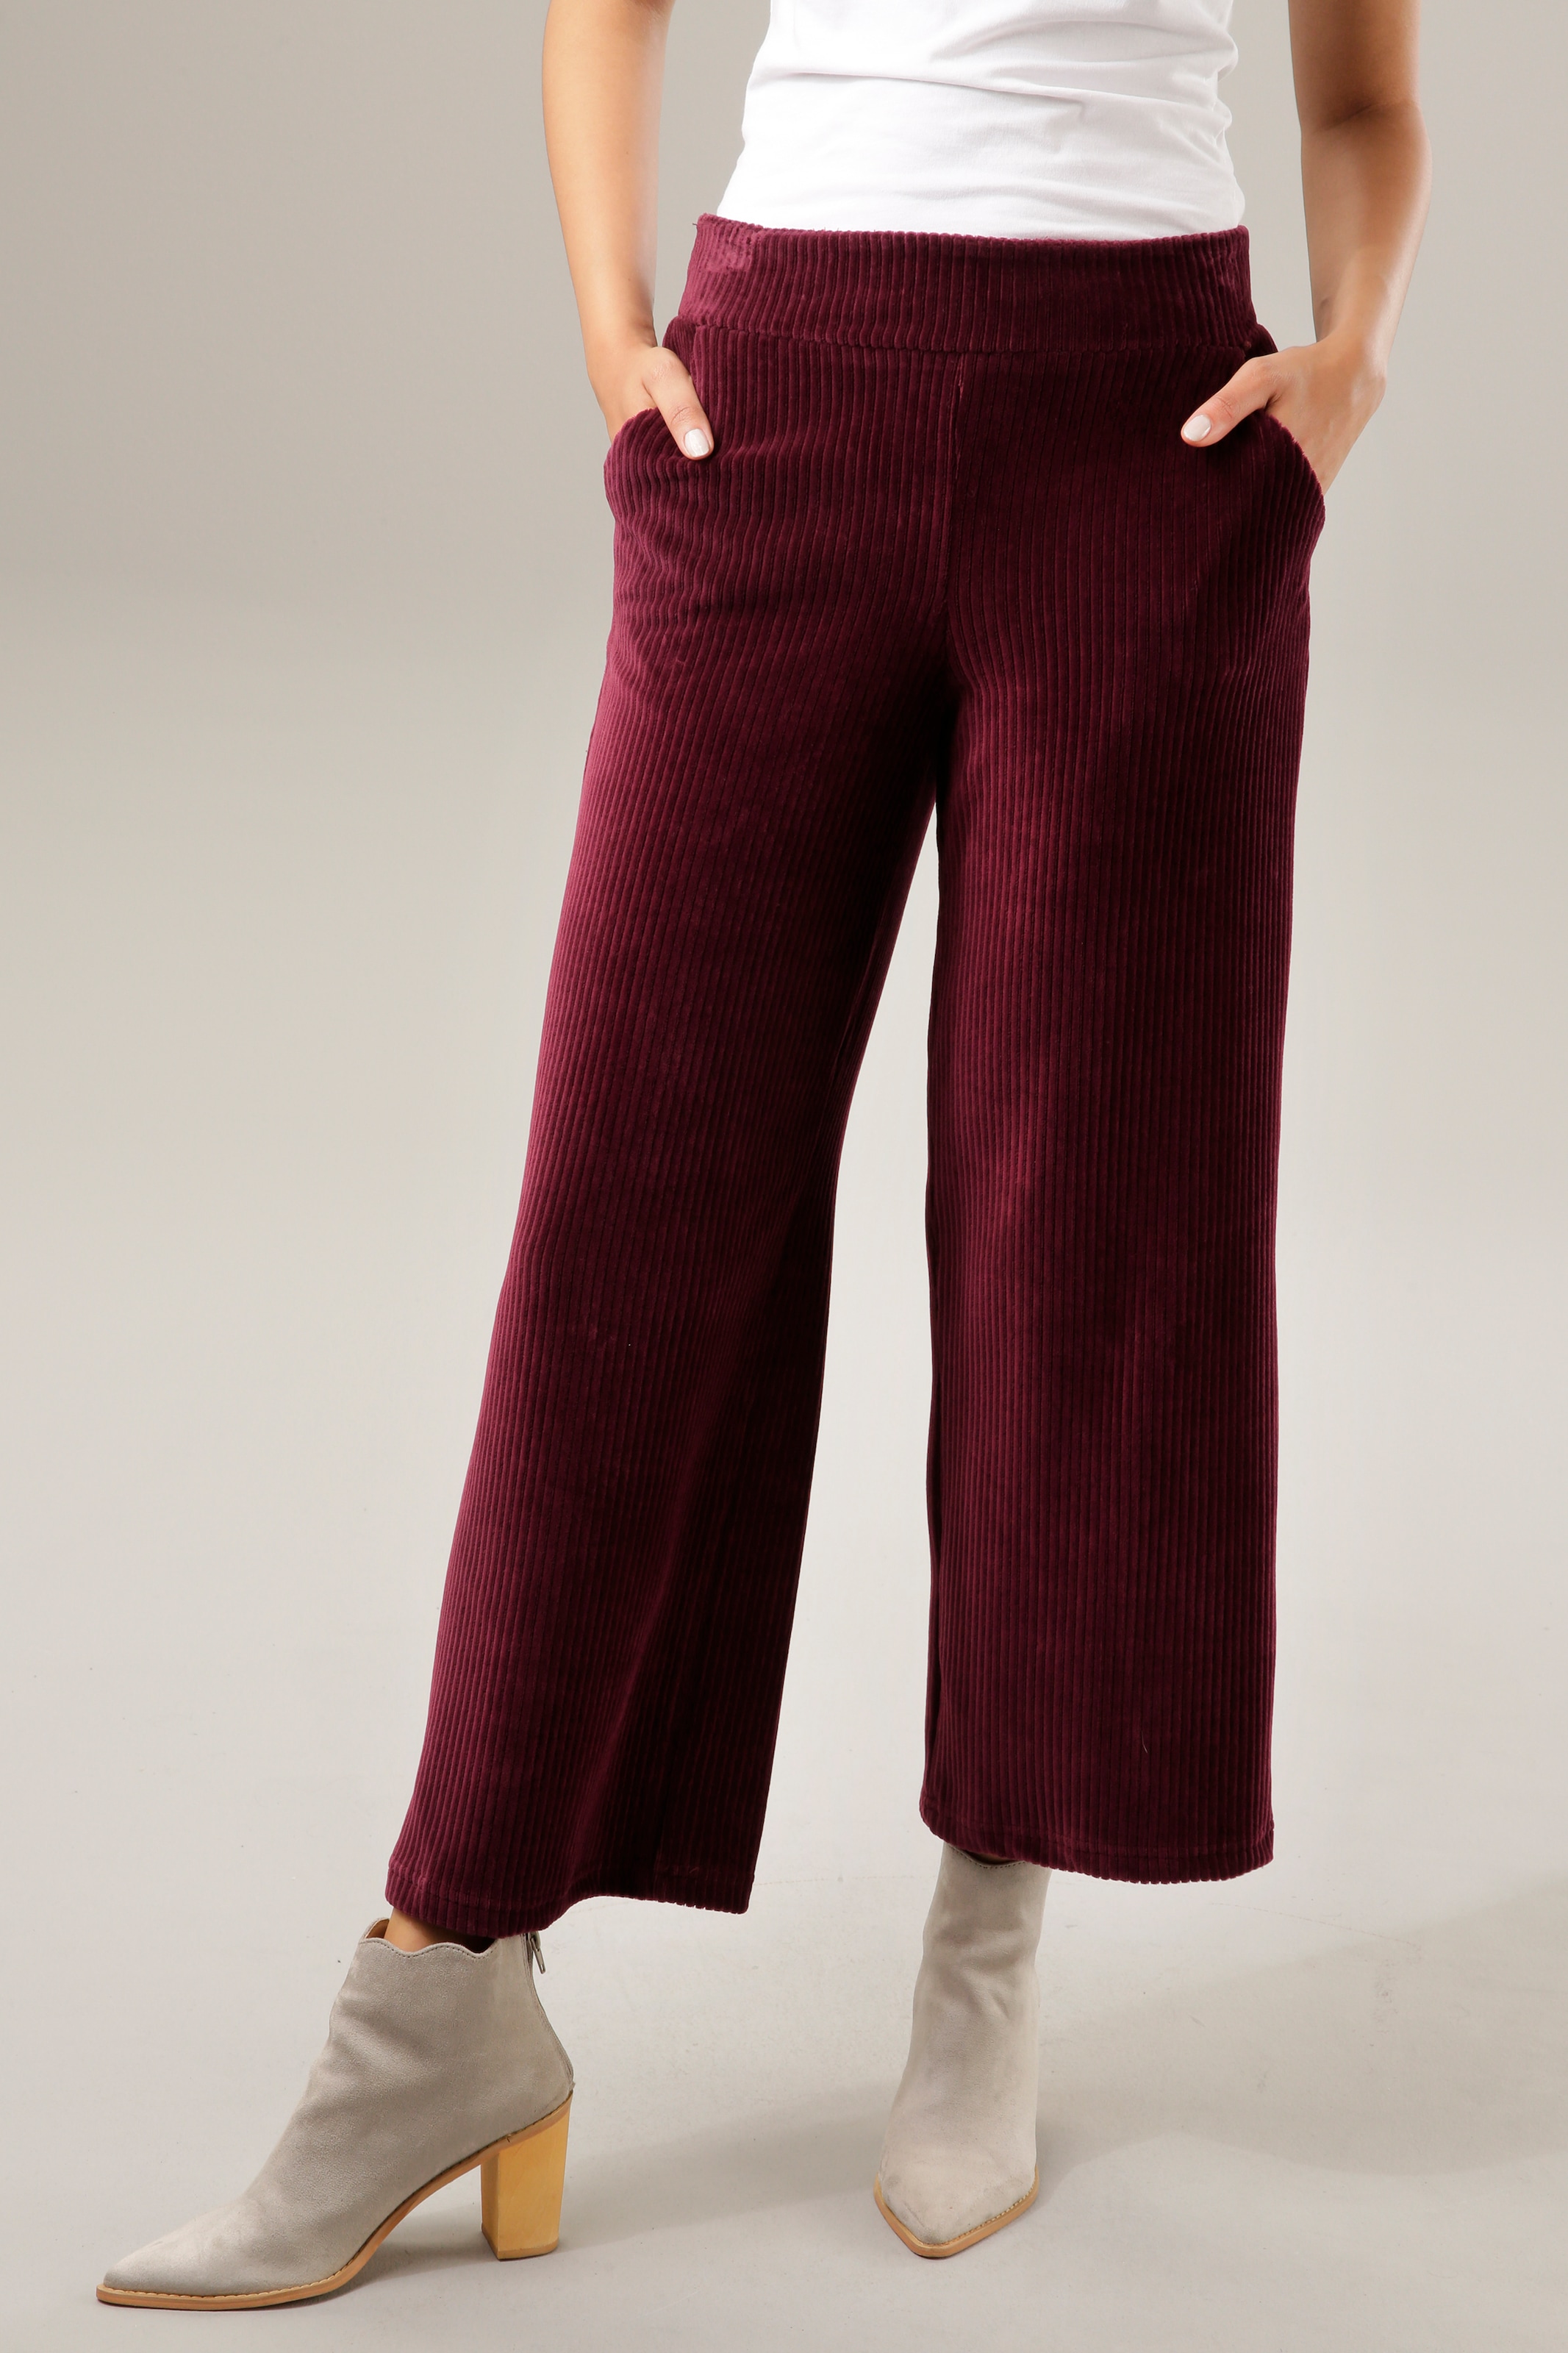 in Cordhose, bei trendiger CASUAL ♕ Aniston Culotte-Form